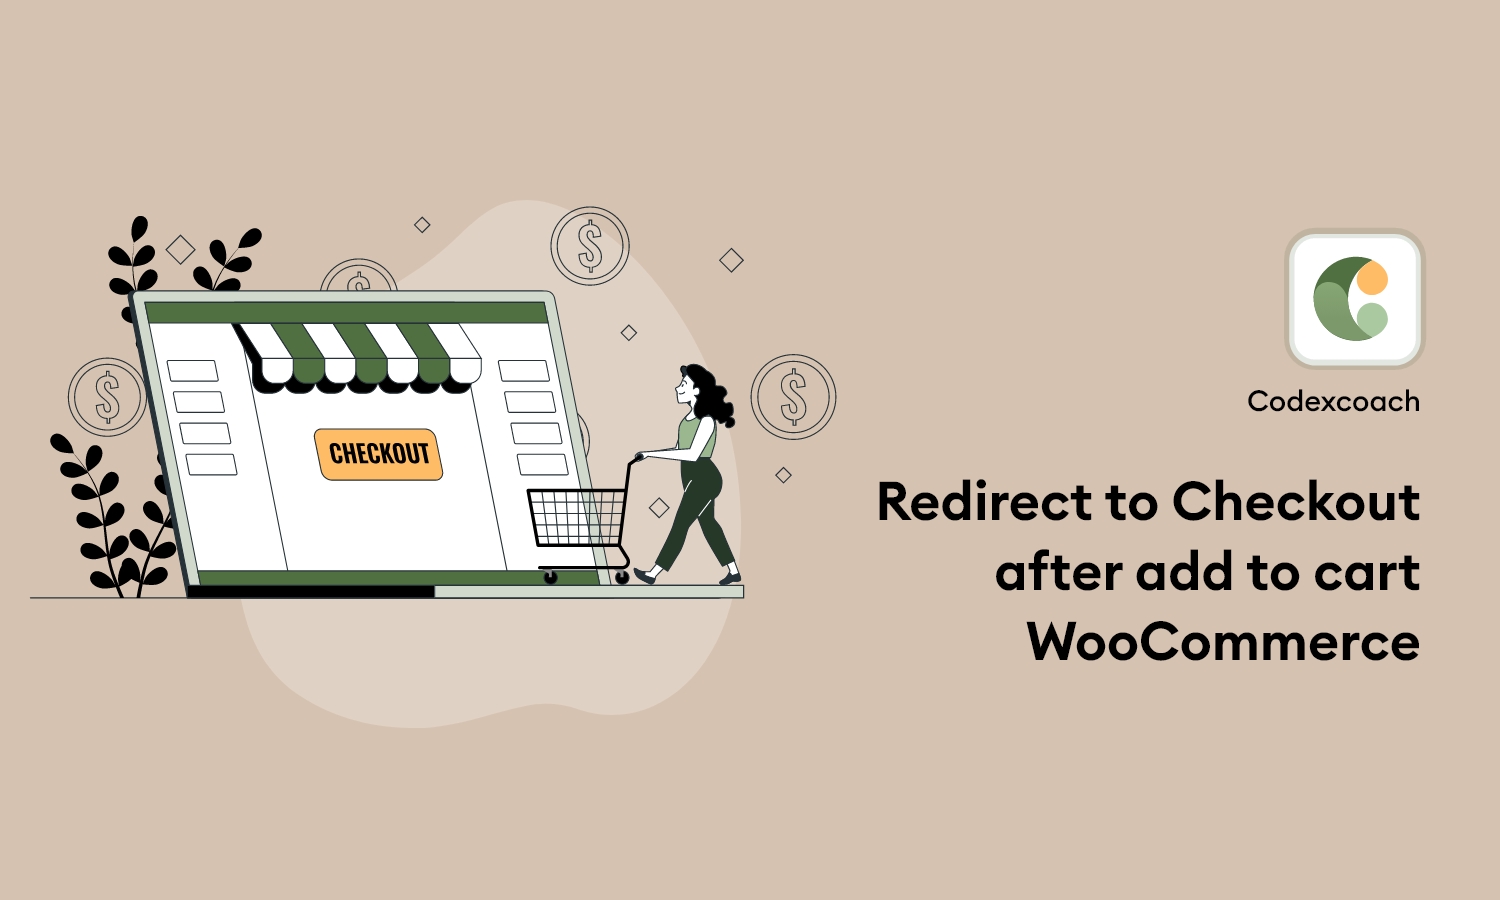 Redirect to Checkout after add to cart WooCommerce